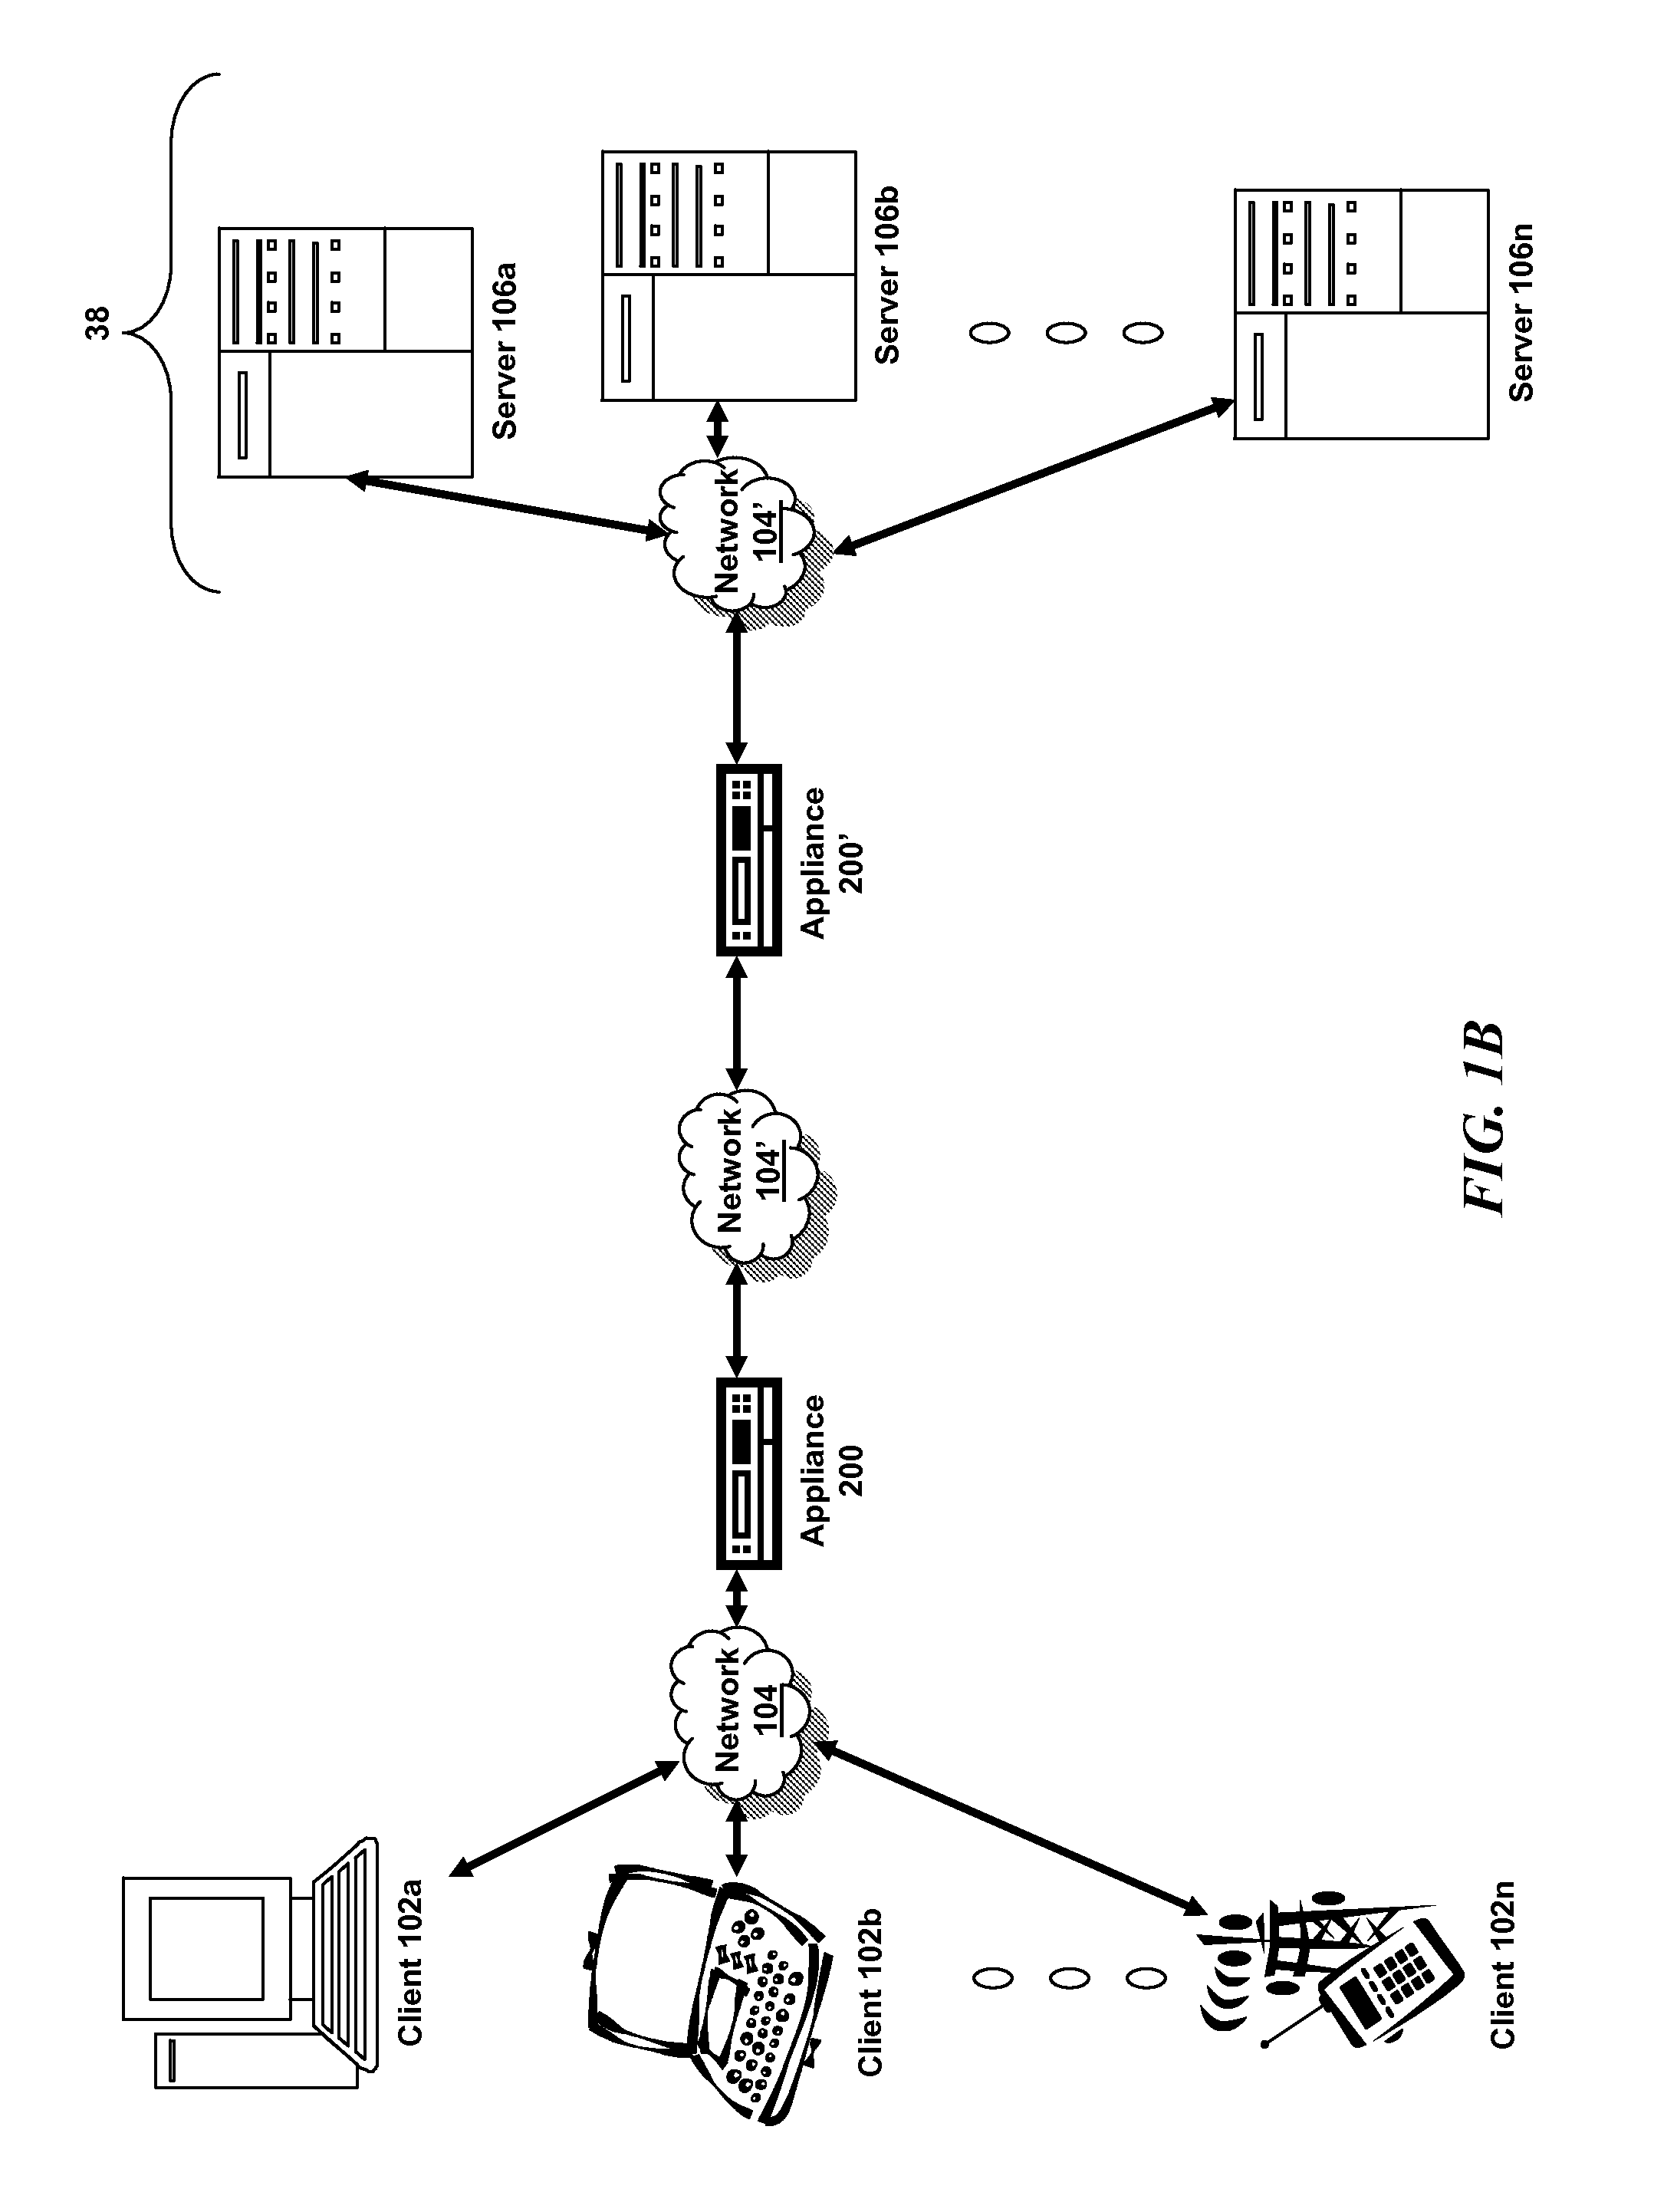 Systems and methods for iip address sharing across cores in a multi-core system